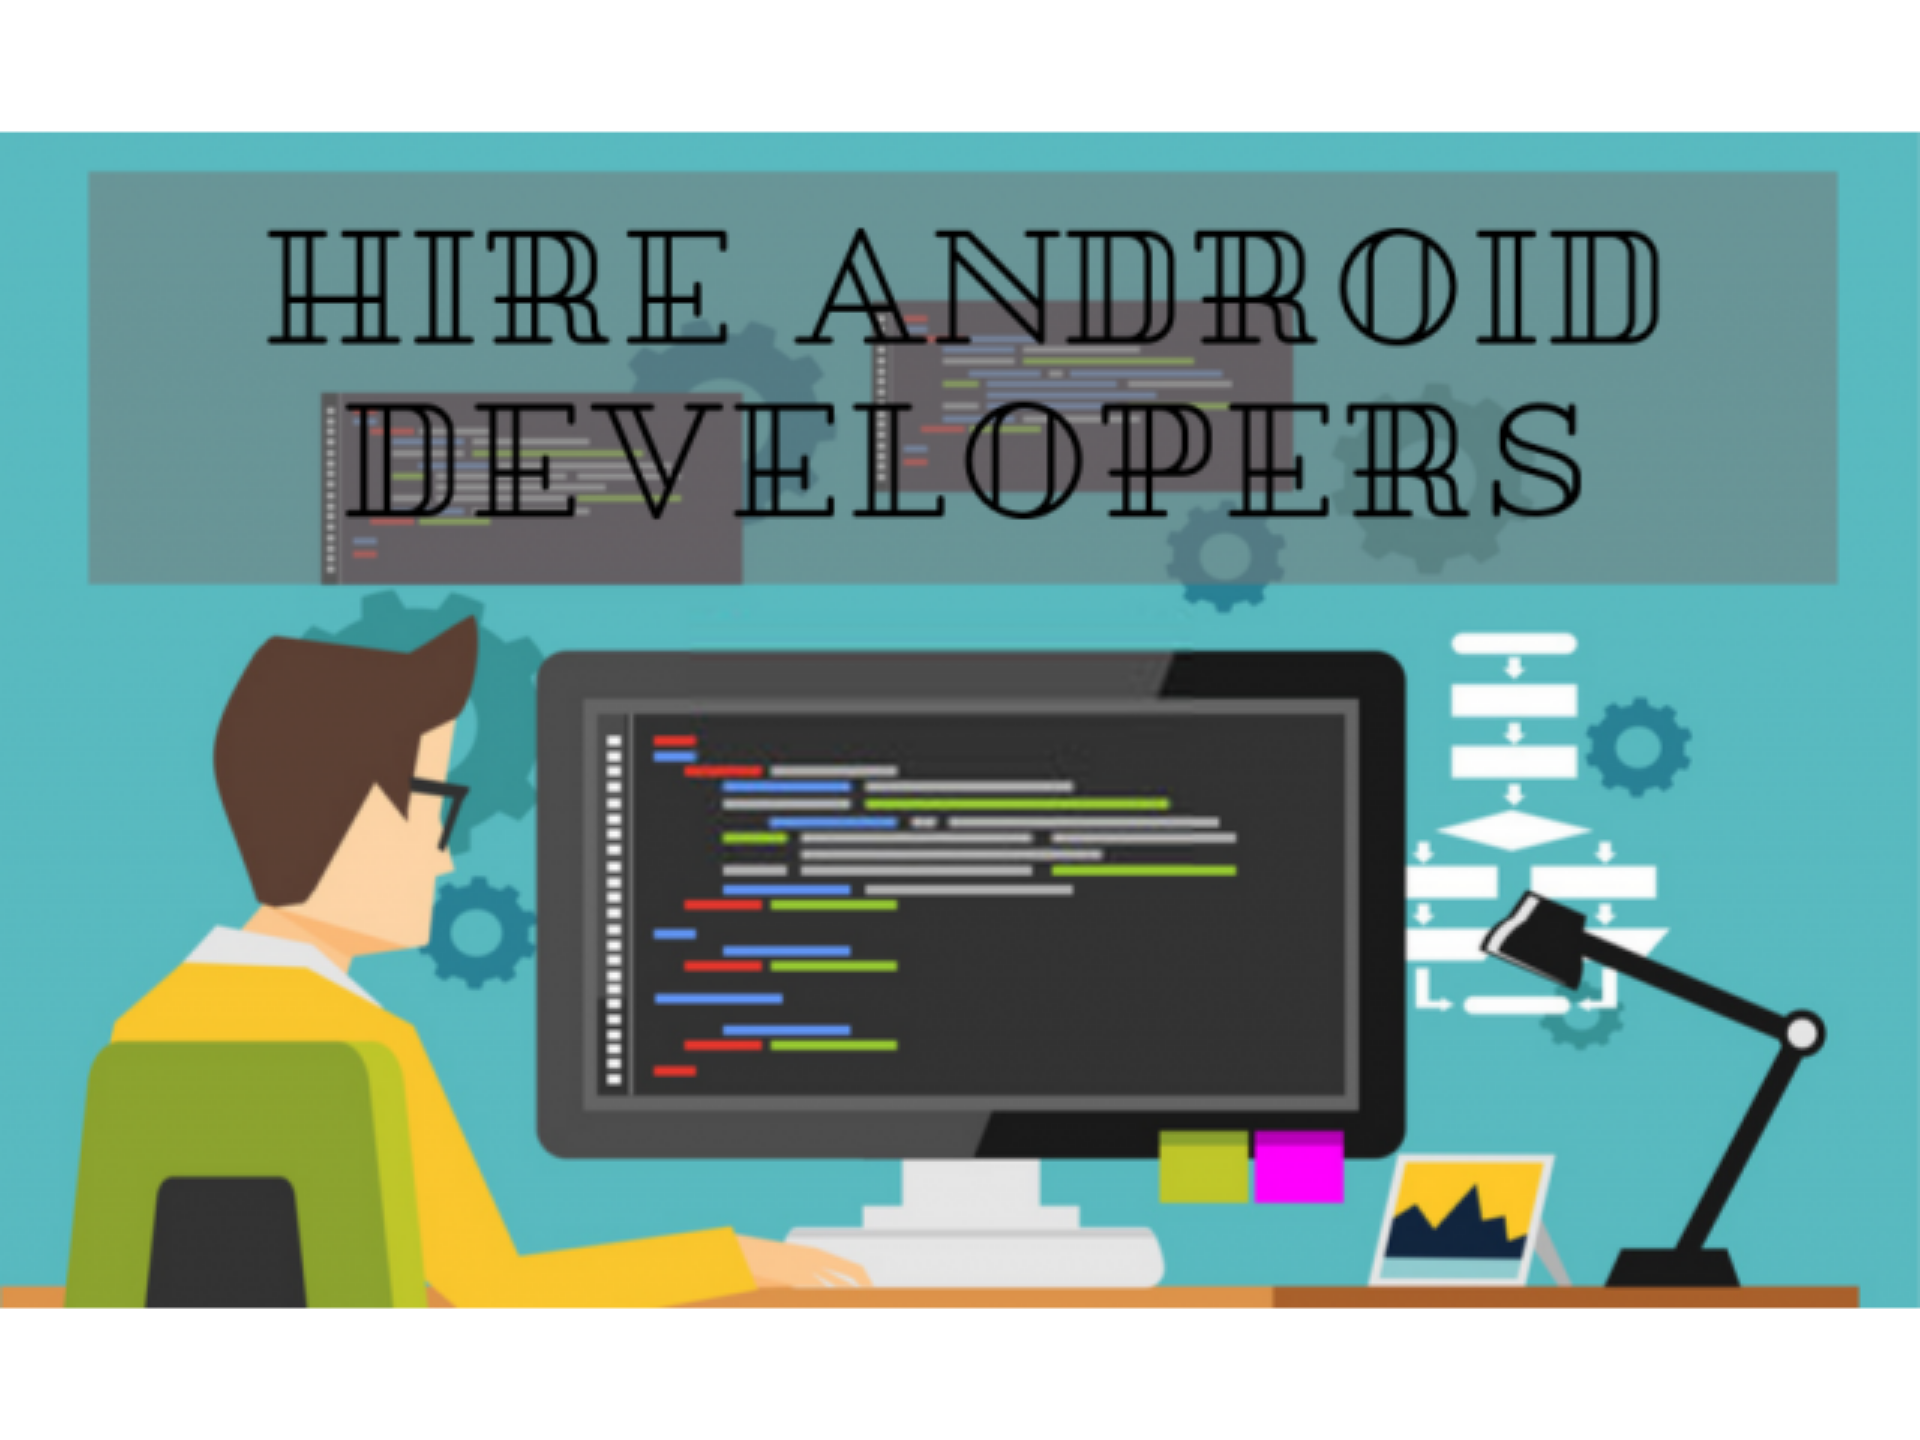 Hire Android App Developer India